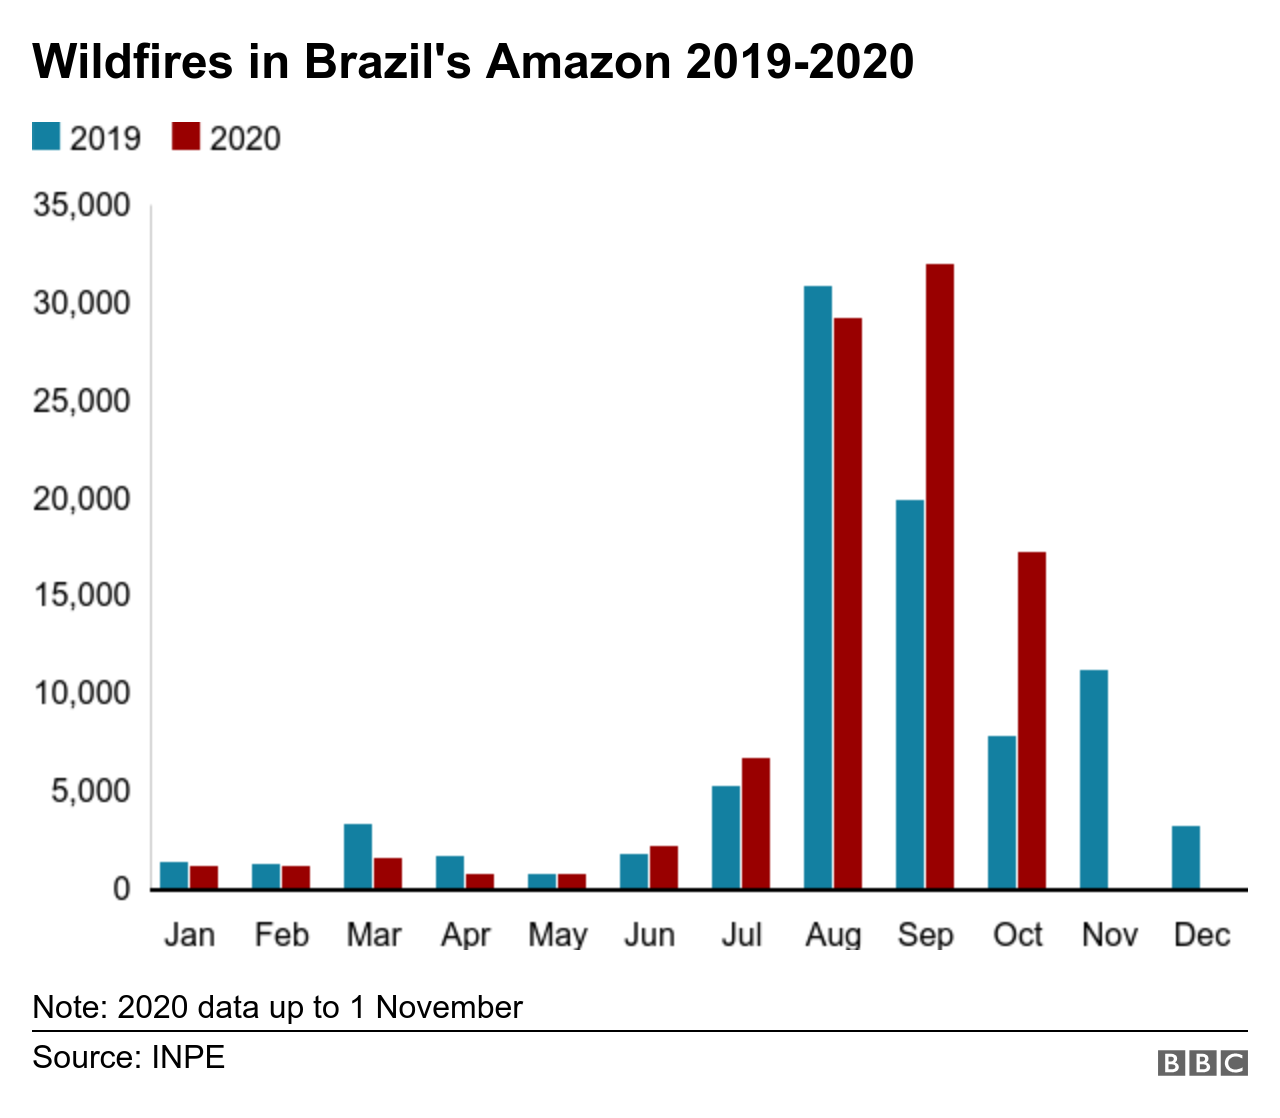 Graph showing the number of fires in the Amazon